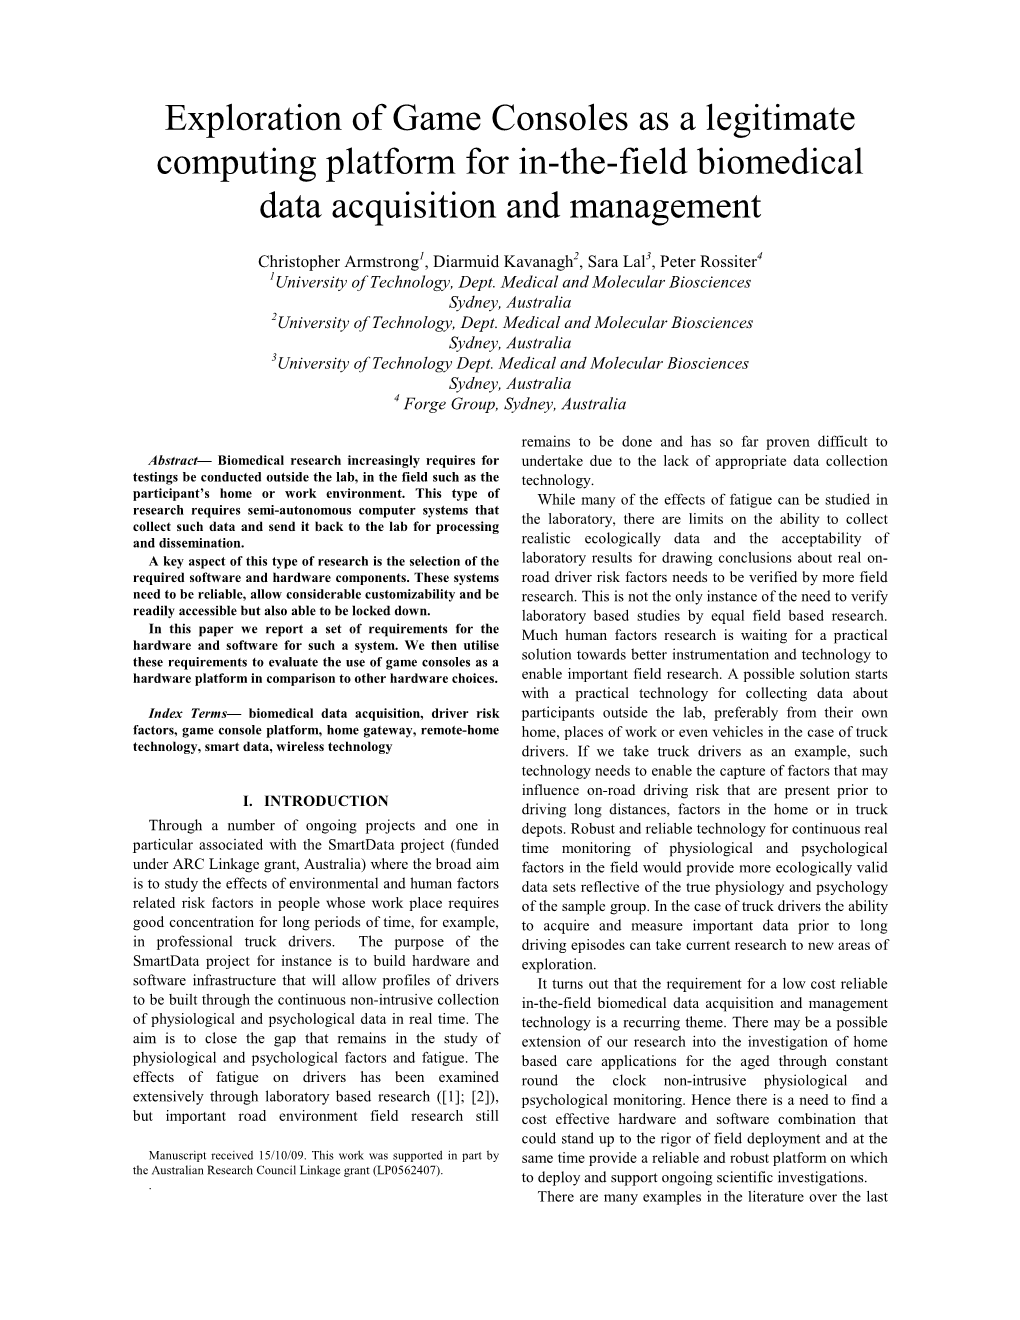 Exploration of Game Consoles As a Legitimate Computing Platform for In-The-Field Biomedical Data Acquisition and Management